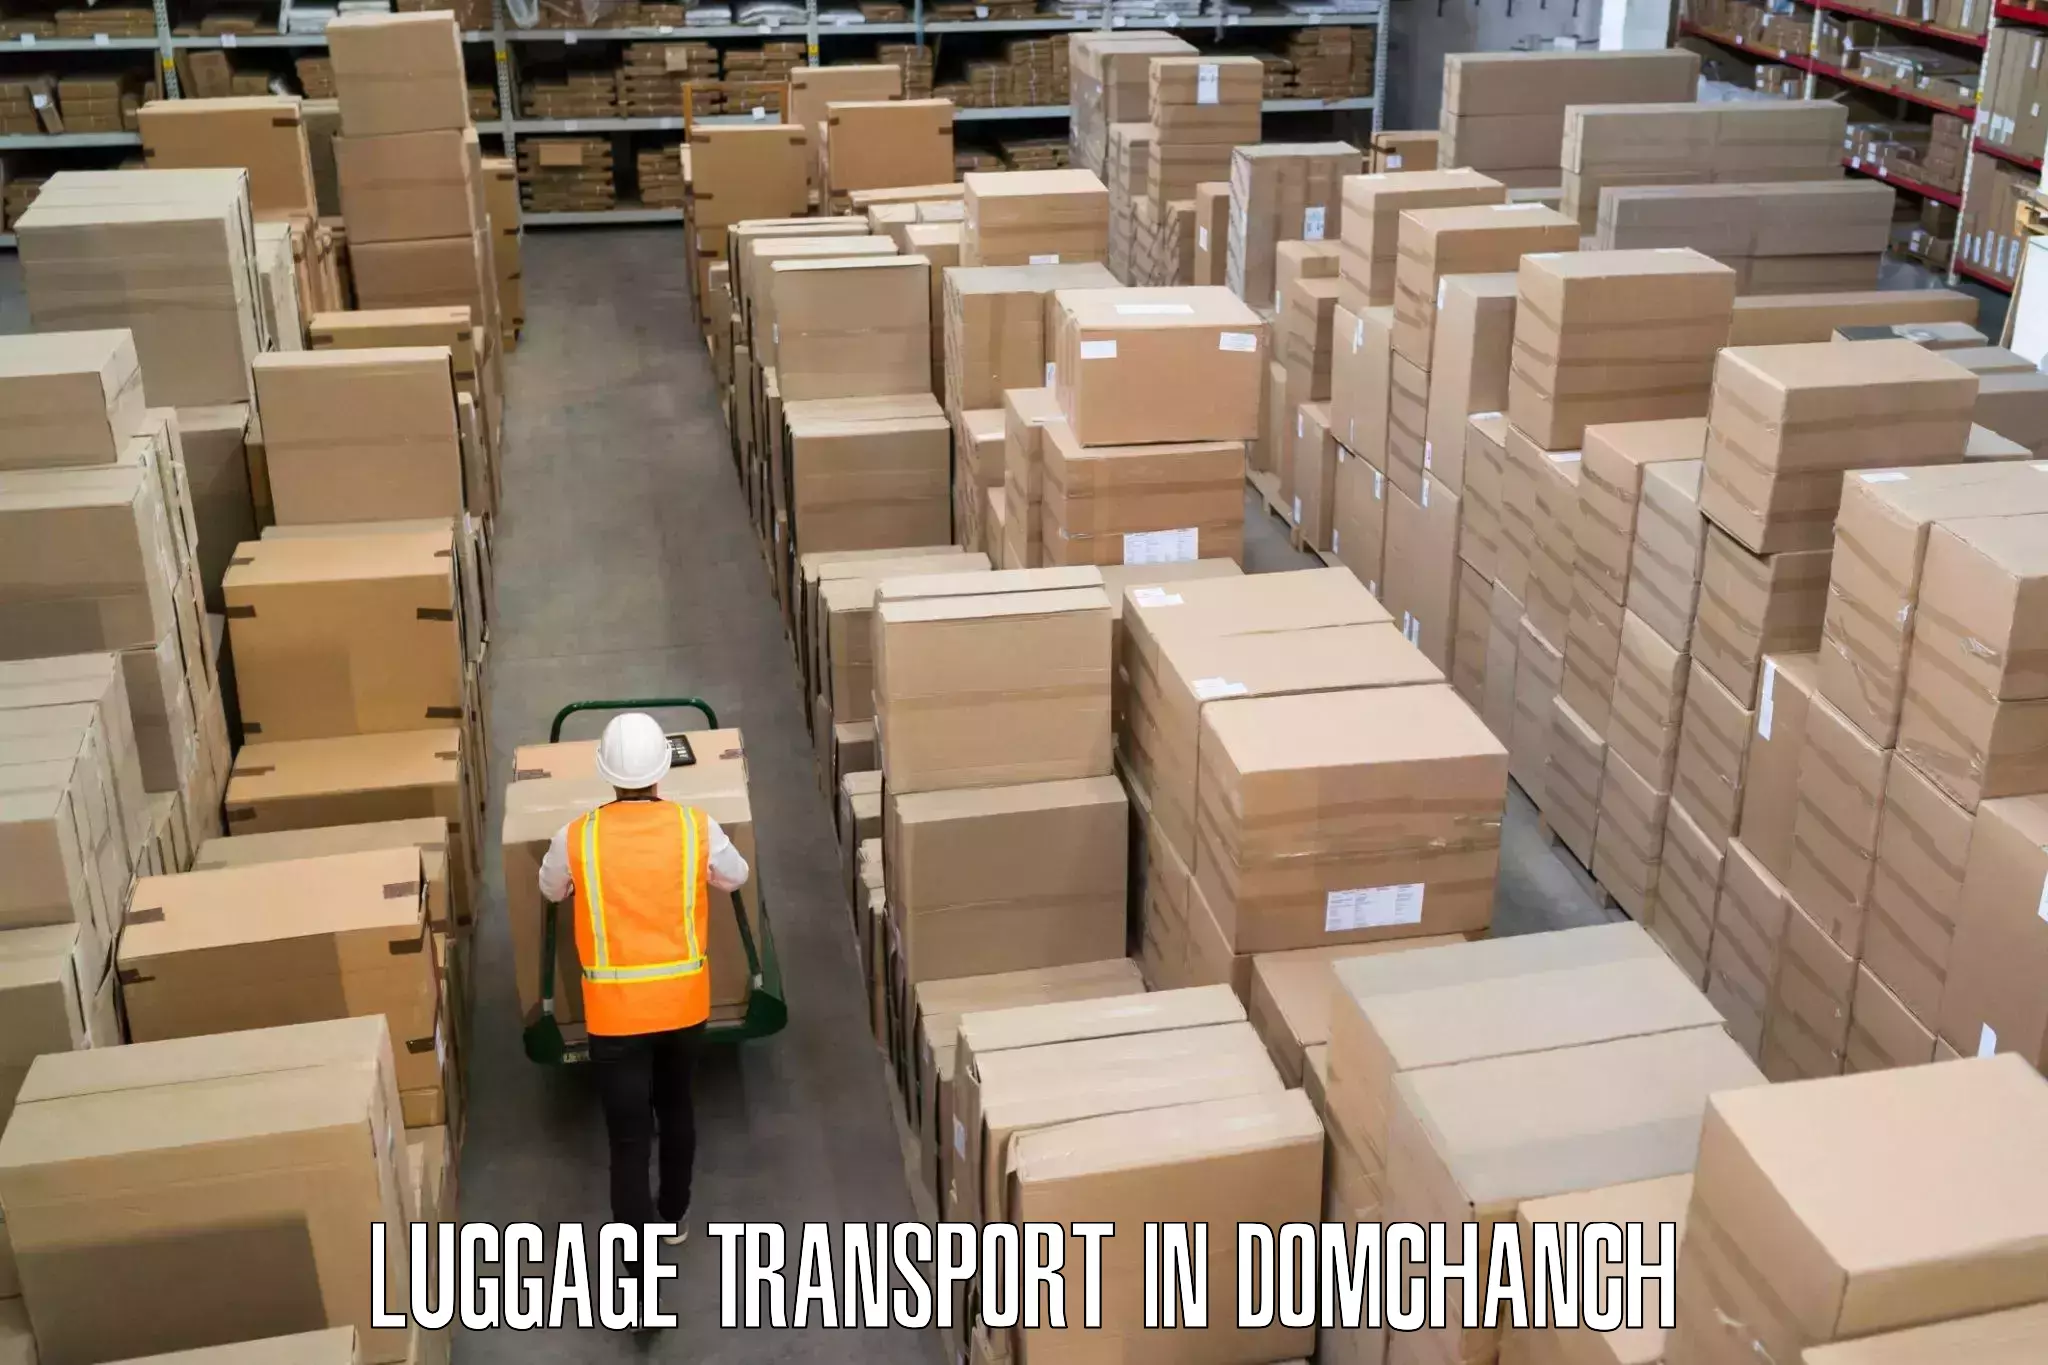 Luggage shipping consultation in Domchanch